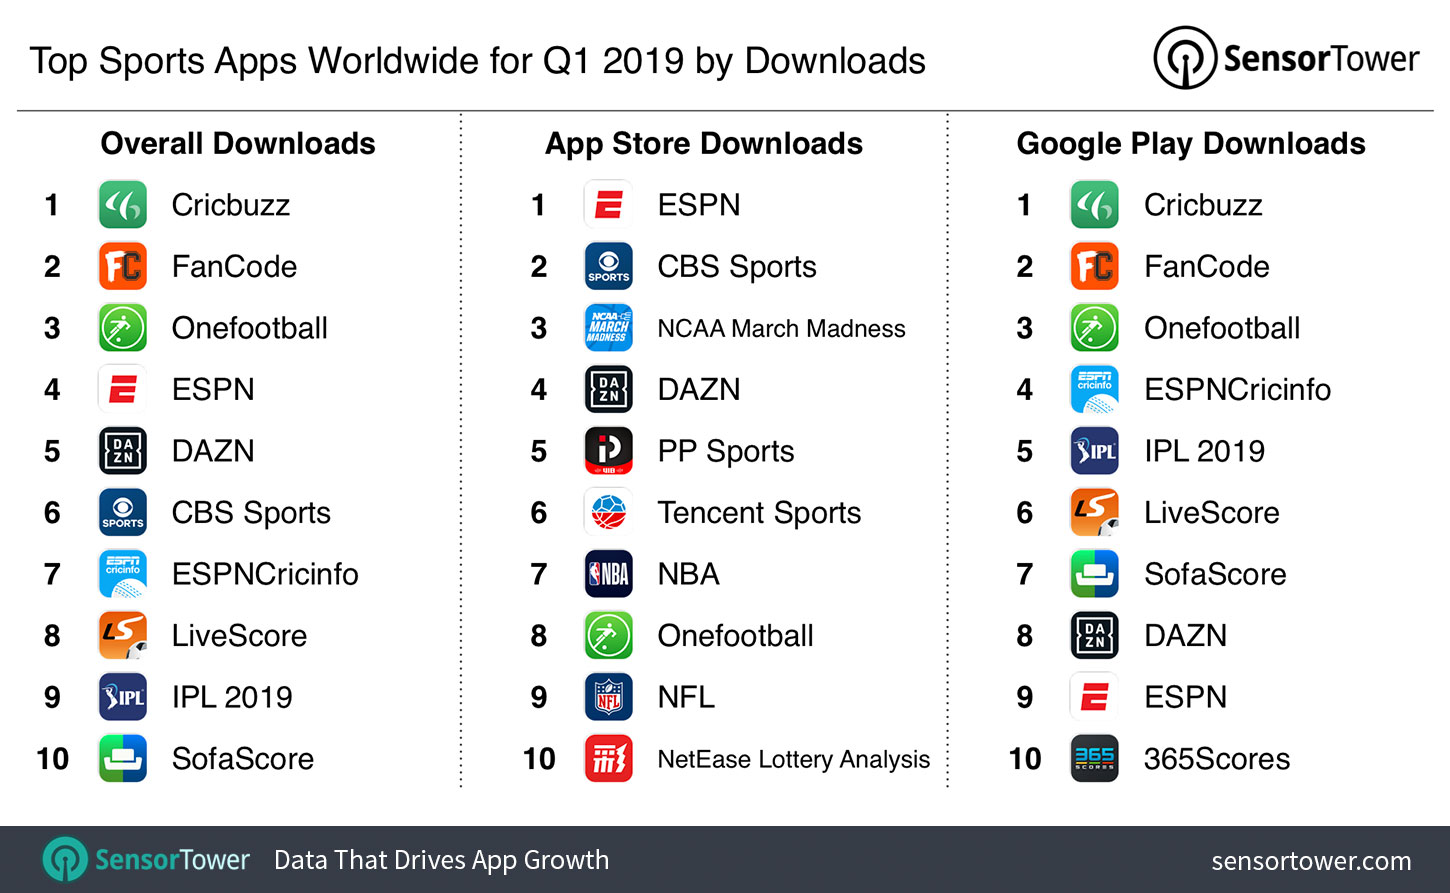 Top Sports Apps Worldwide for Q1 2019 by Downloads